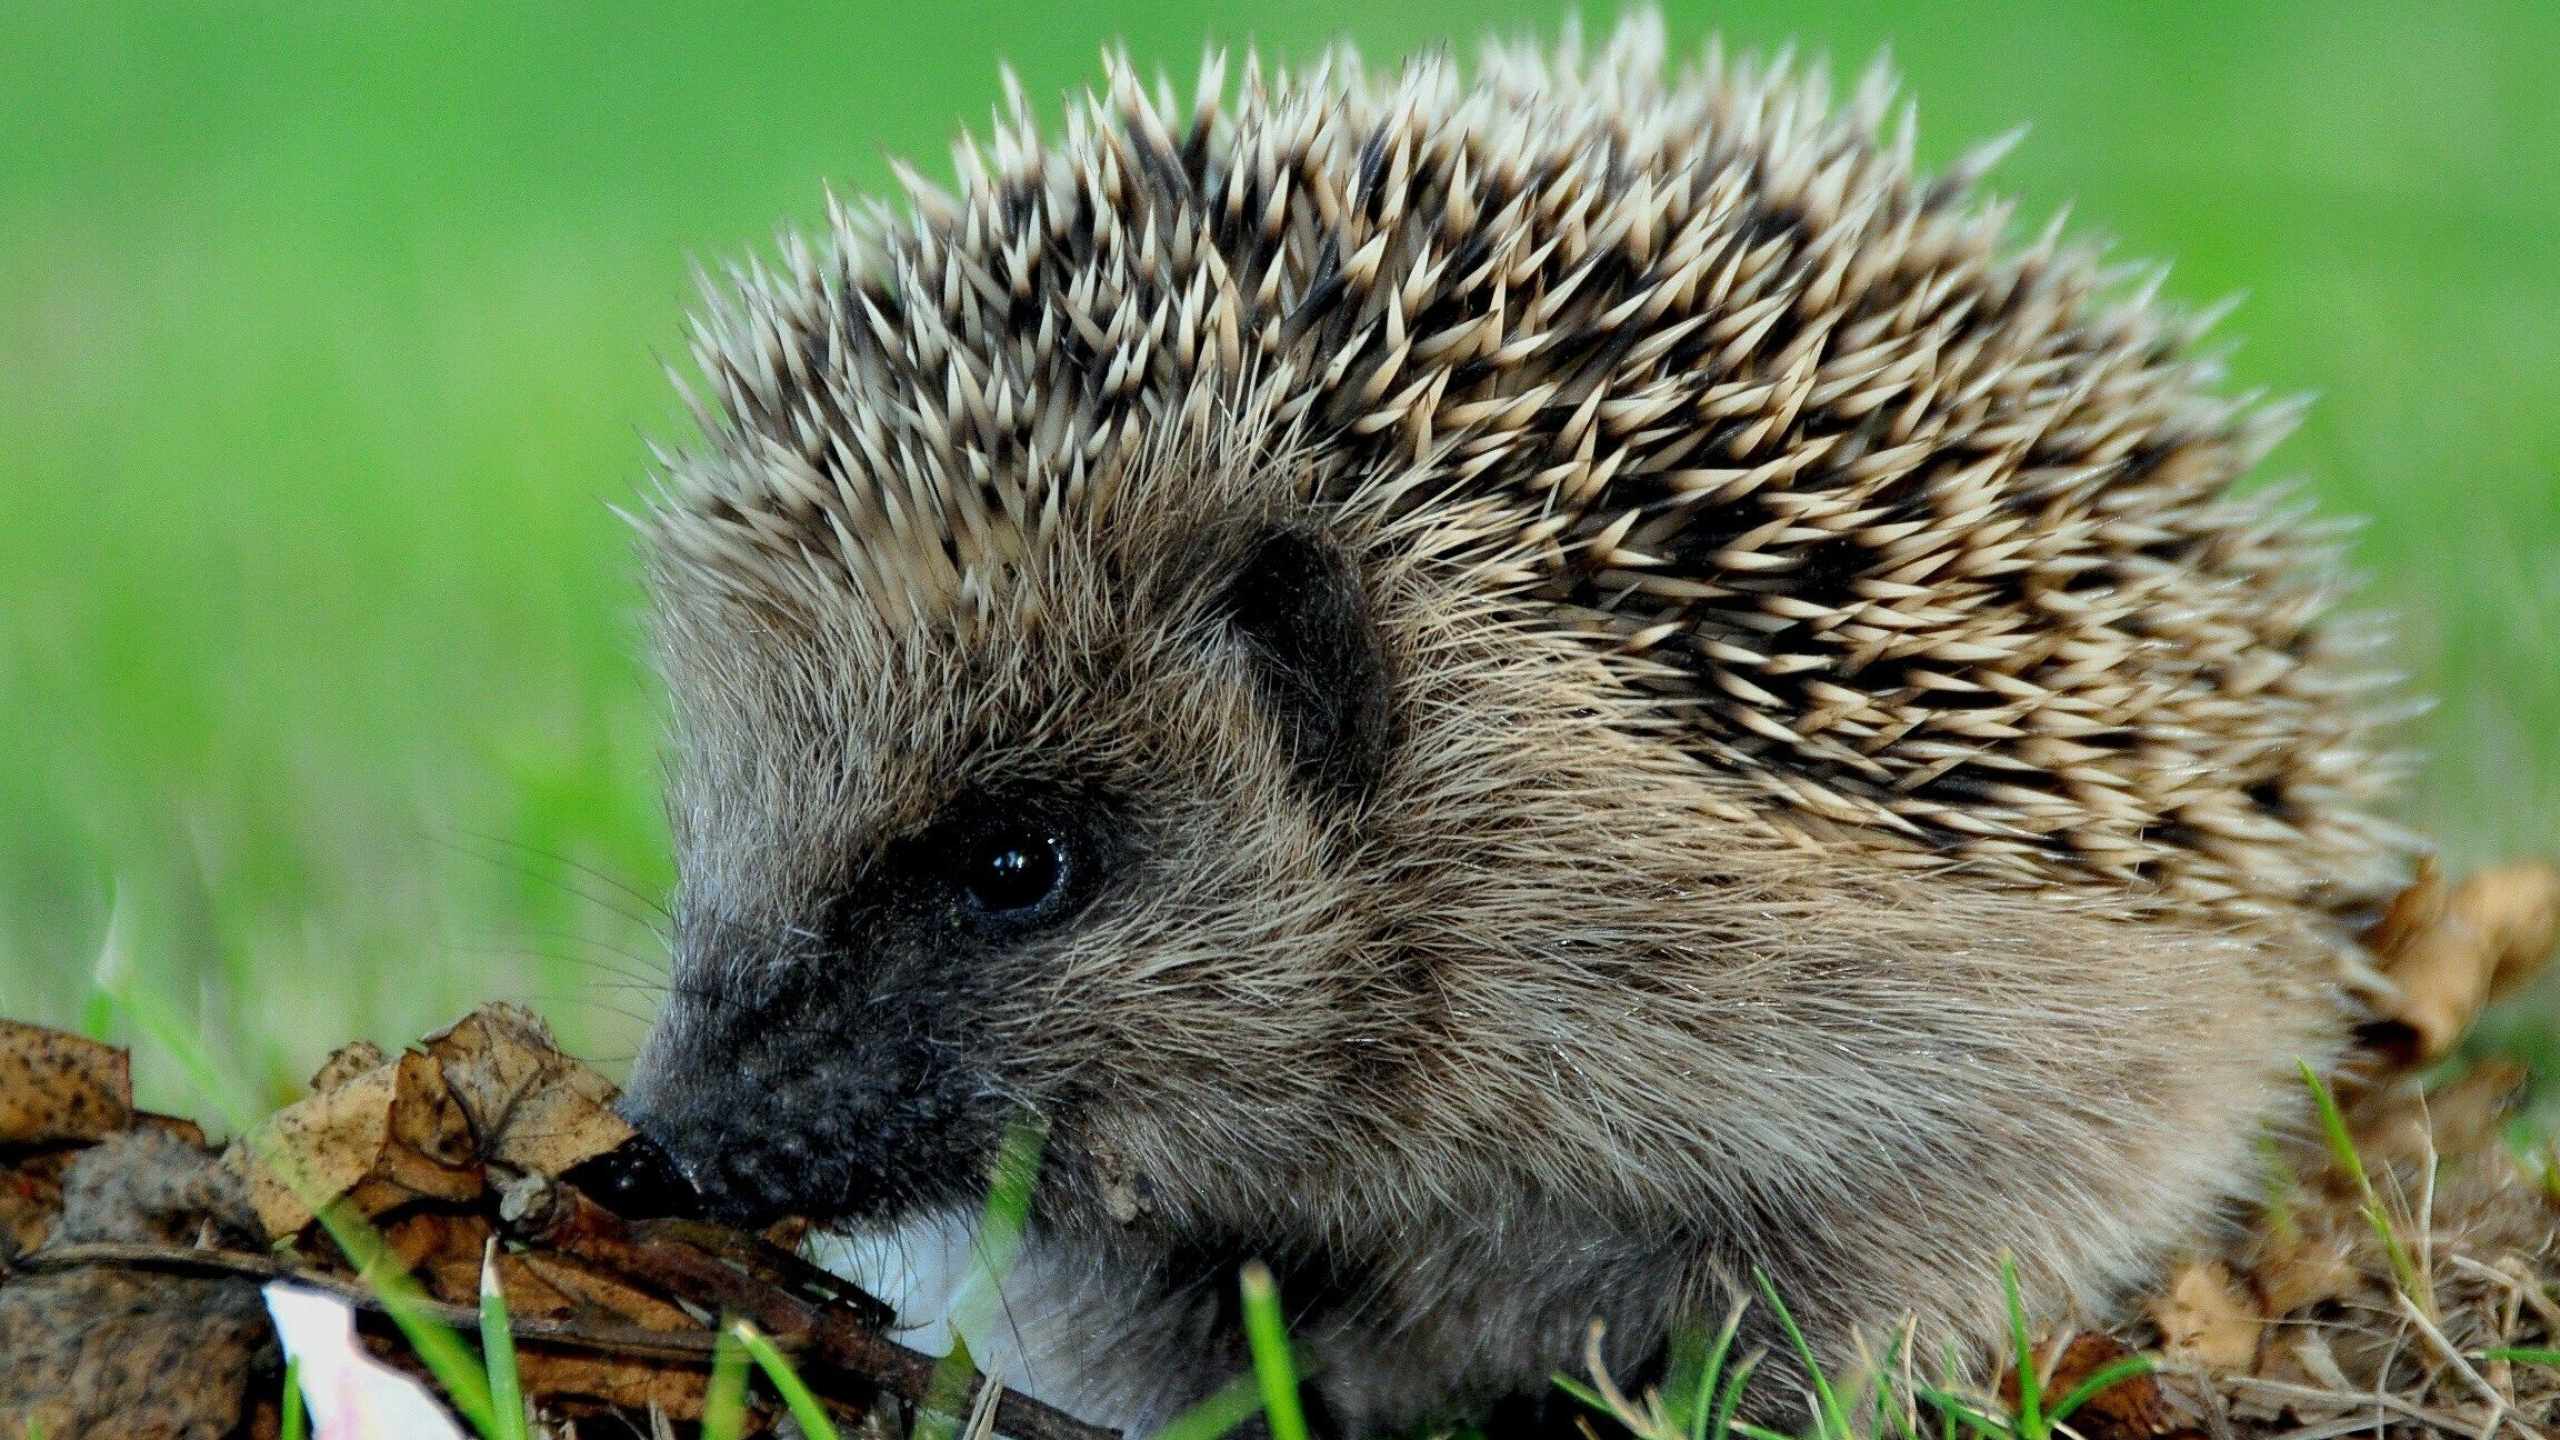 Hedgehog: Each quill is hard, hollowed hair whose interior consists of numerous air pockets. 2560x1440 HD Wallpaper.